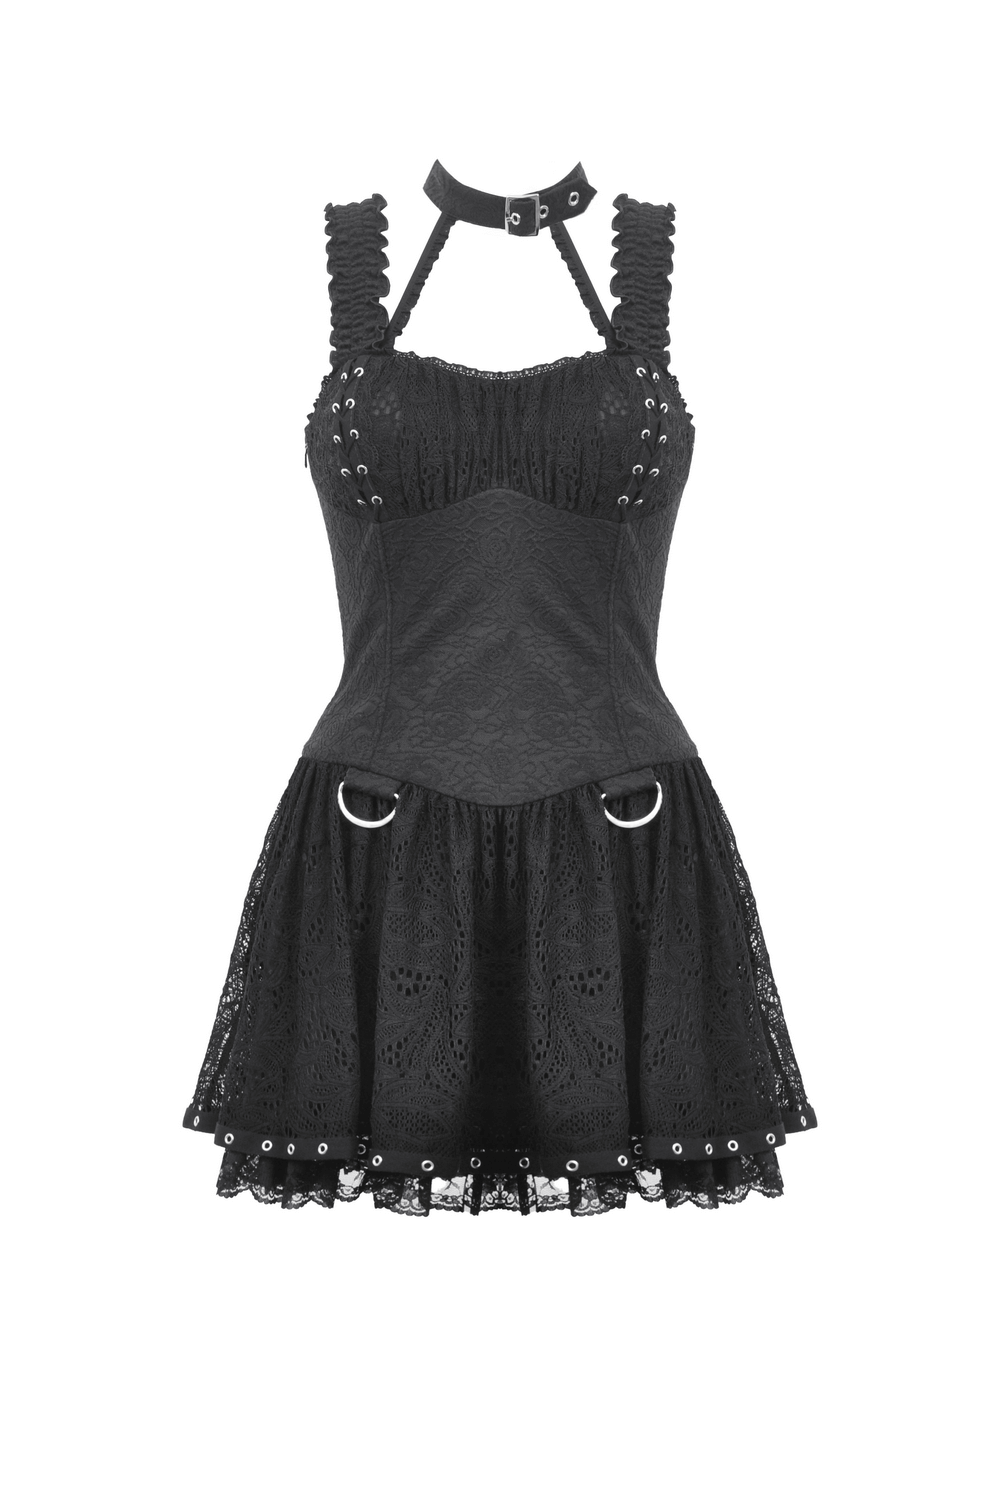 Gothic Lace-Up Dress with Metal Rings and Halter Neck